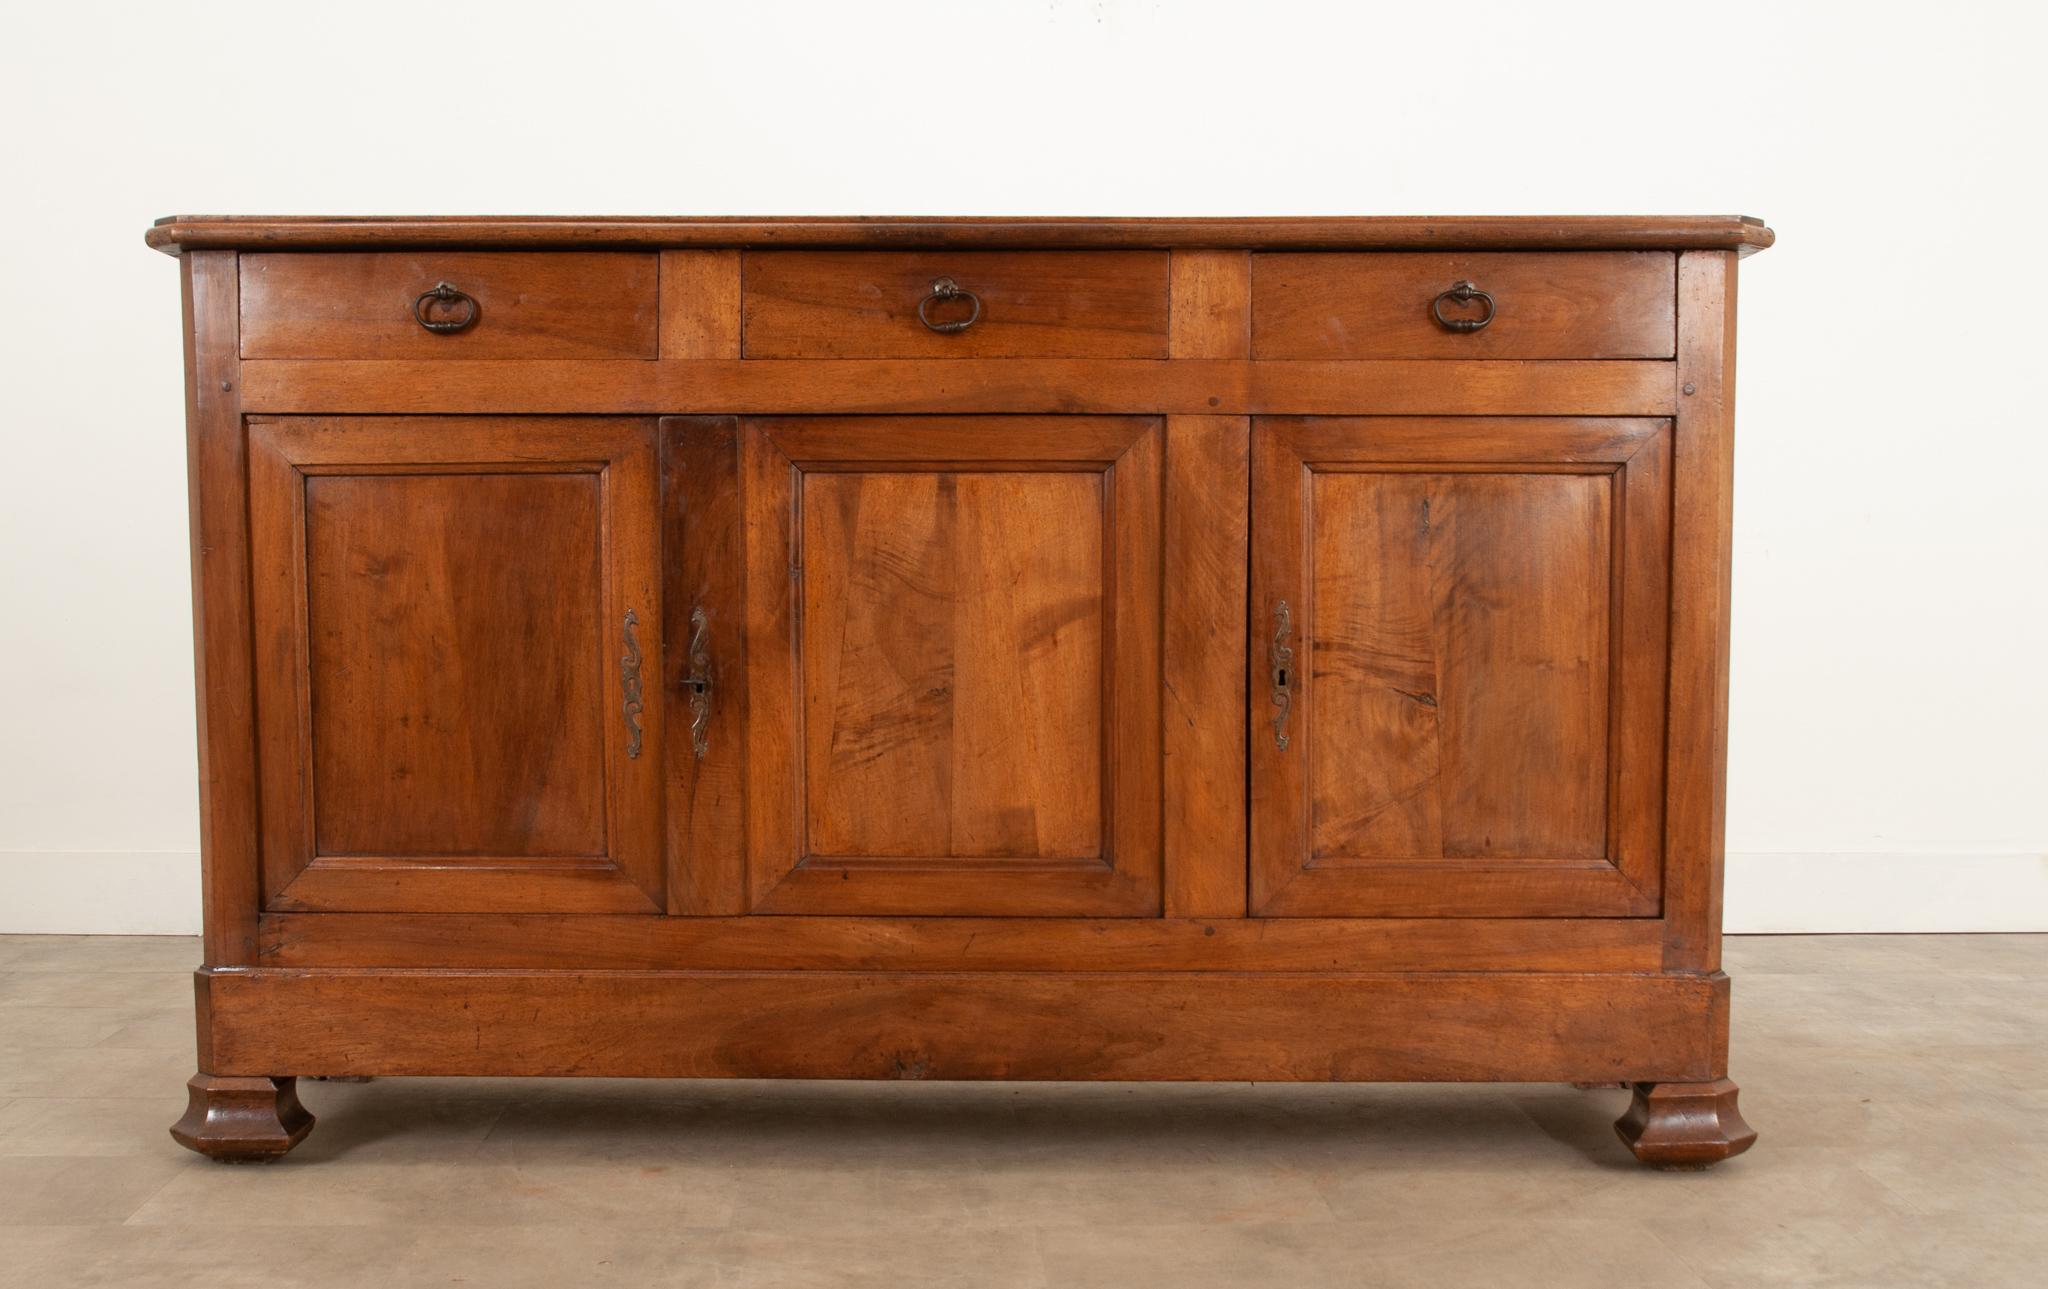 This attractive Louis Philippe style solid walnut enfilade with canted corners, c. 1870, features a gorgeous patinated finish highlighting the rustic charm of this piece. The wood top sits above an apron with three drawers, each with an oval brass